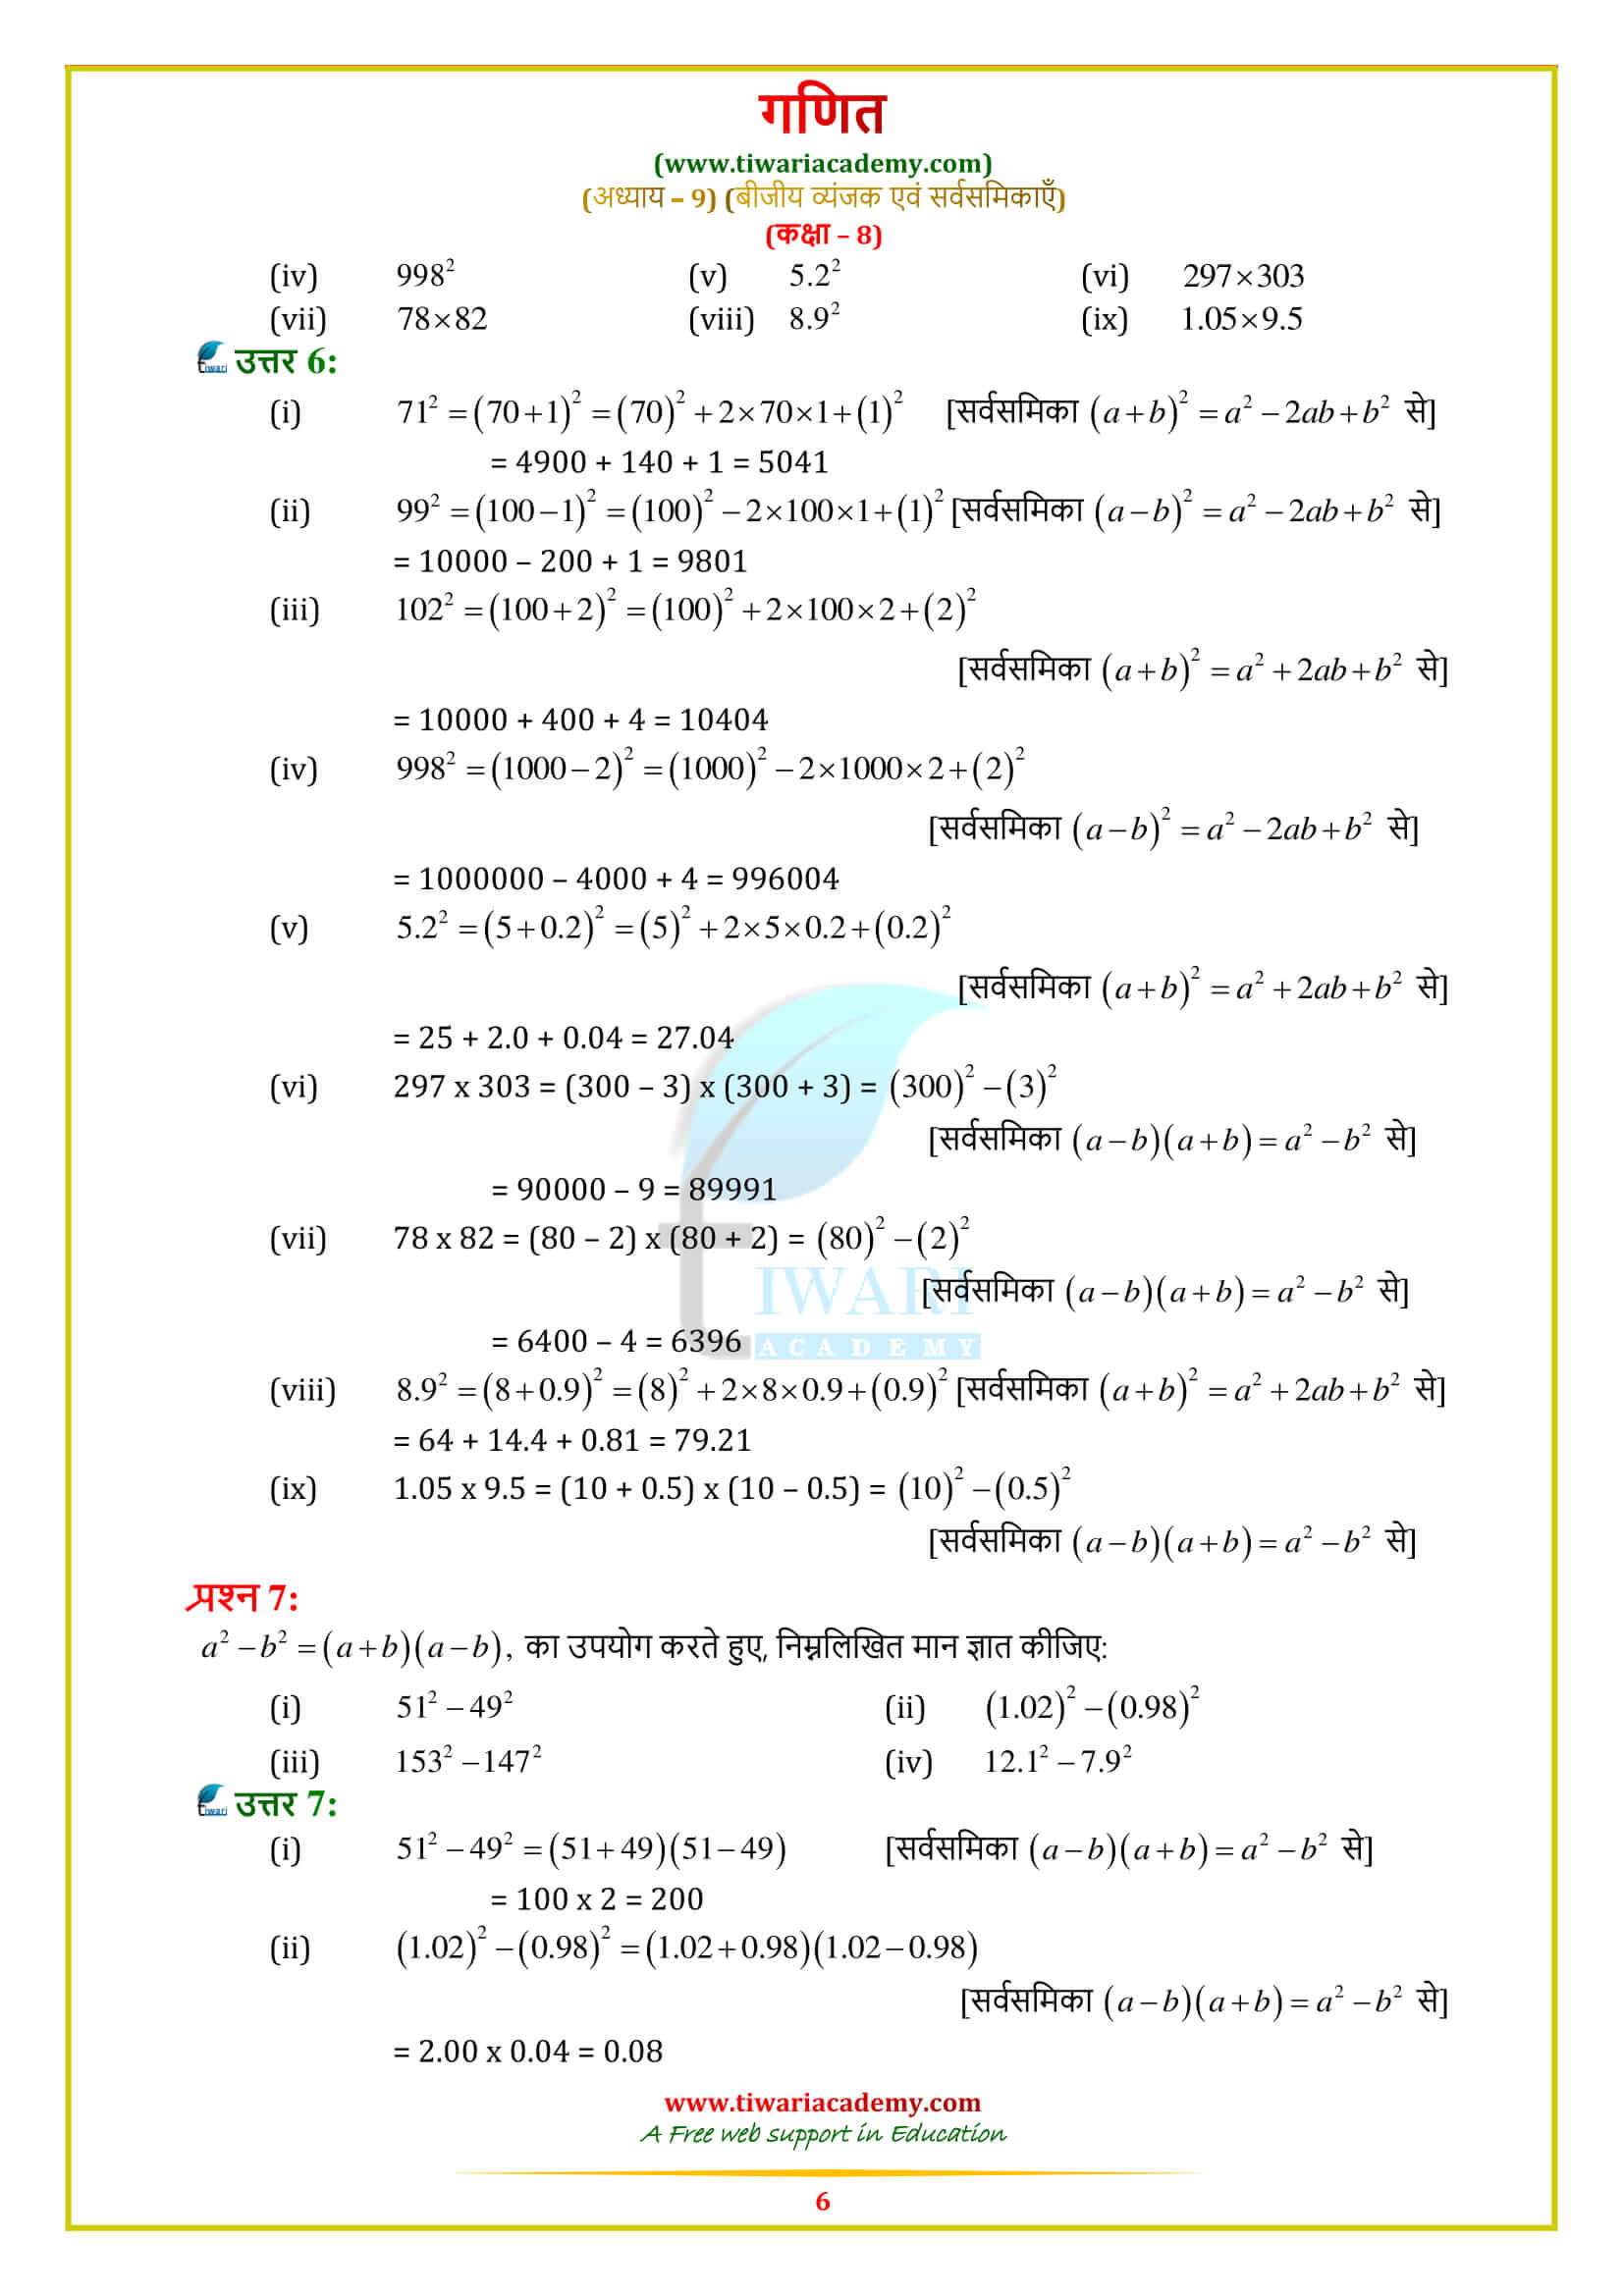 8 Maths Exercise 9.5 Solutions for 2018-19 cbse board